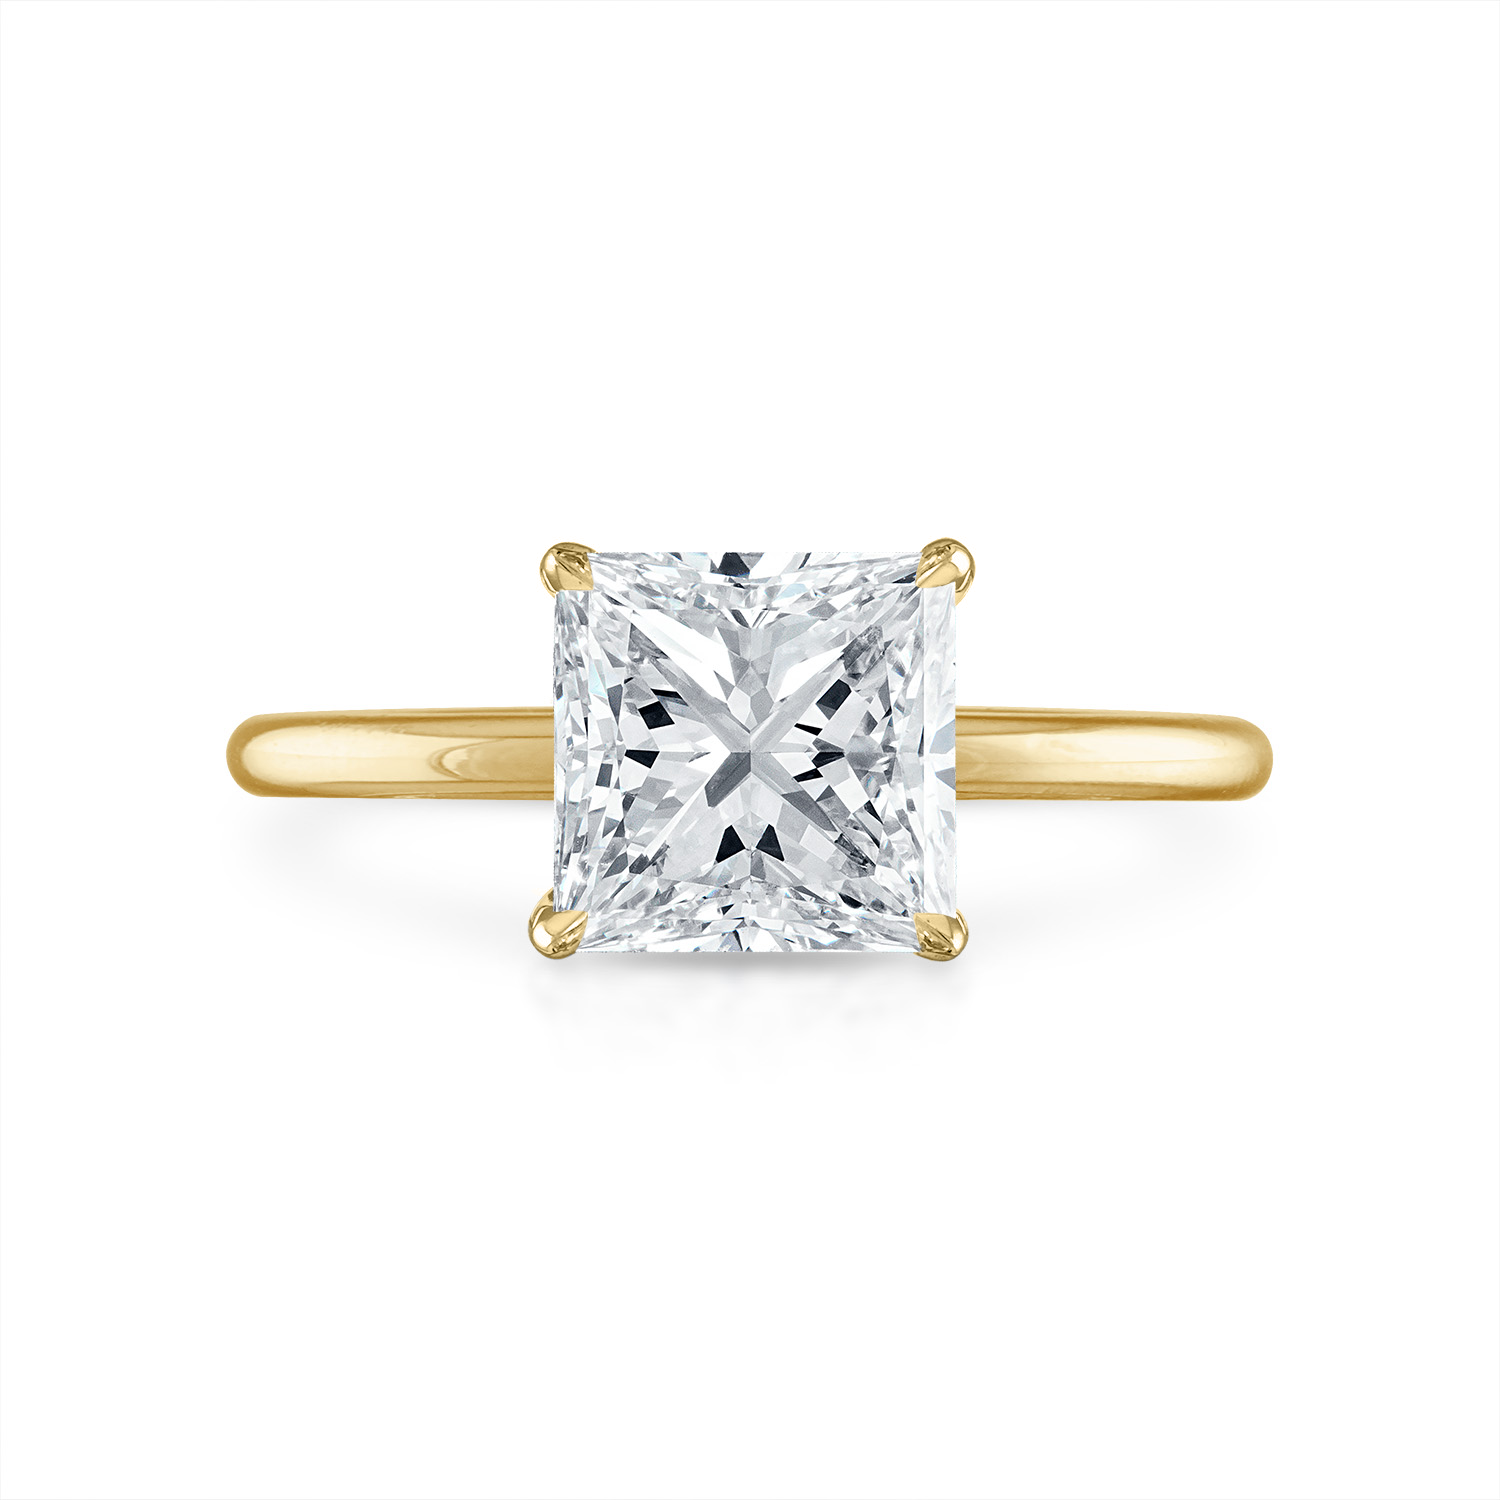 Princess Solitaire Engagement Ring in Yellow Gold